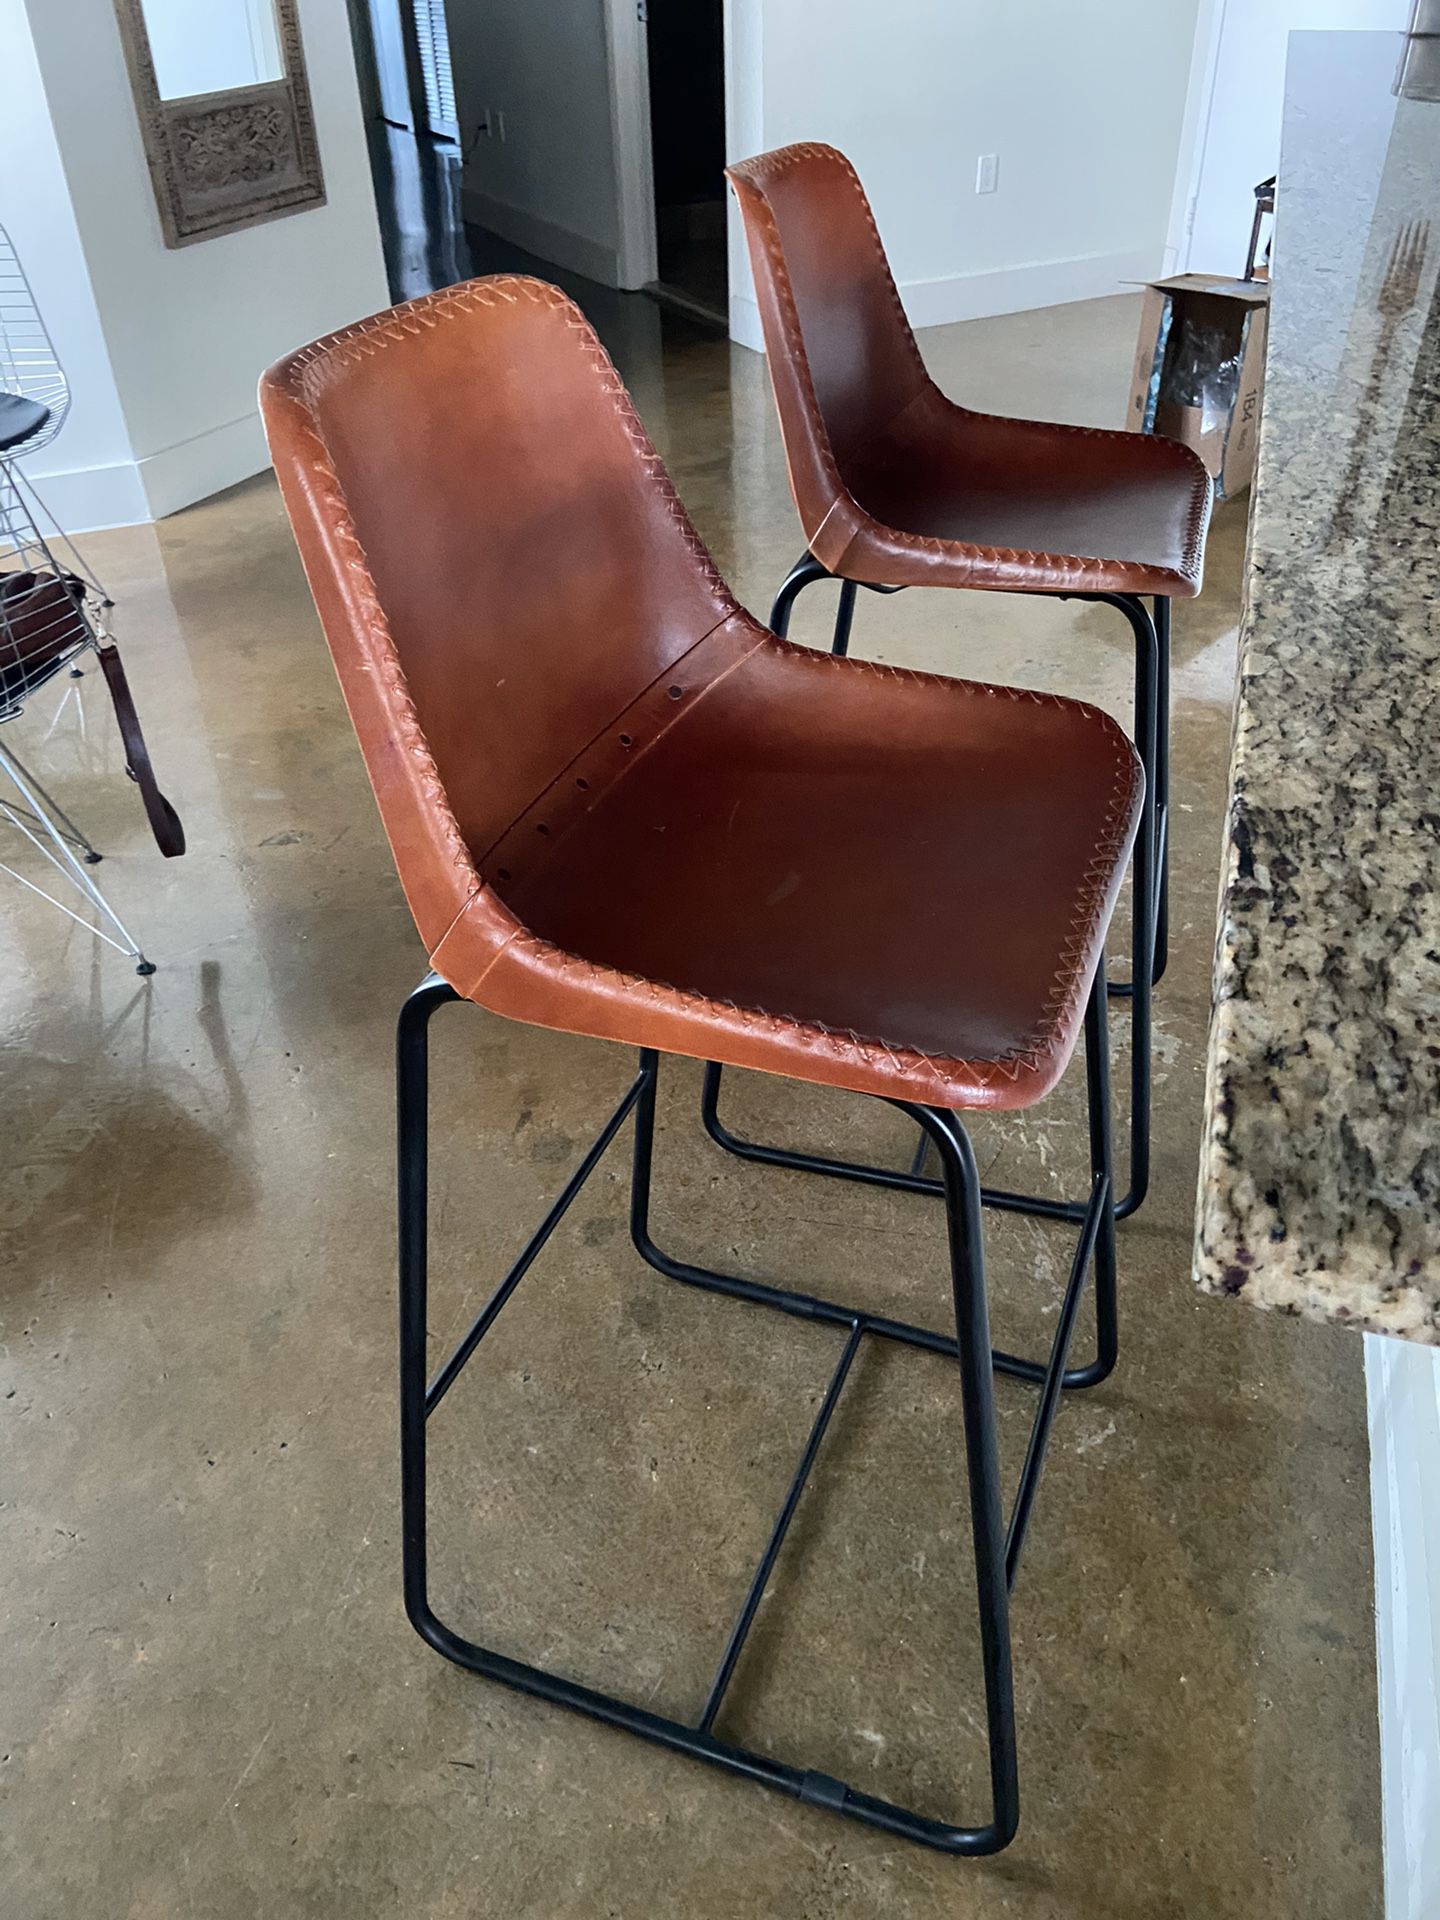 CB2 Bar stools. Retails $300/each w tax. Asking $300 for both.